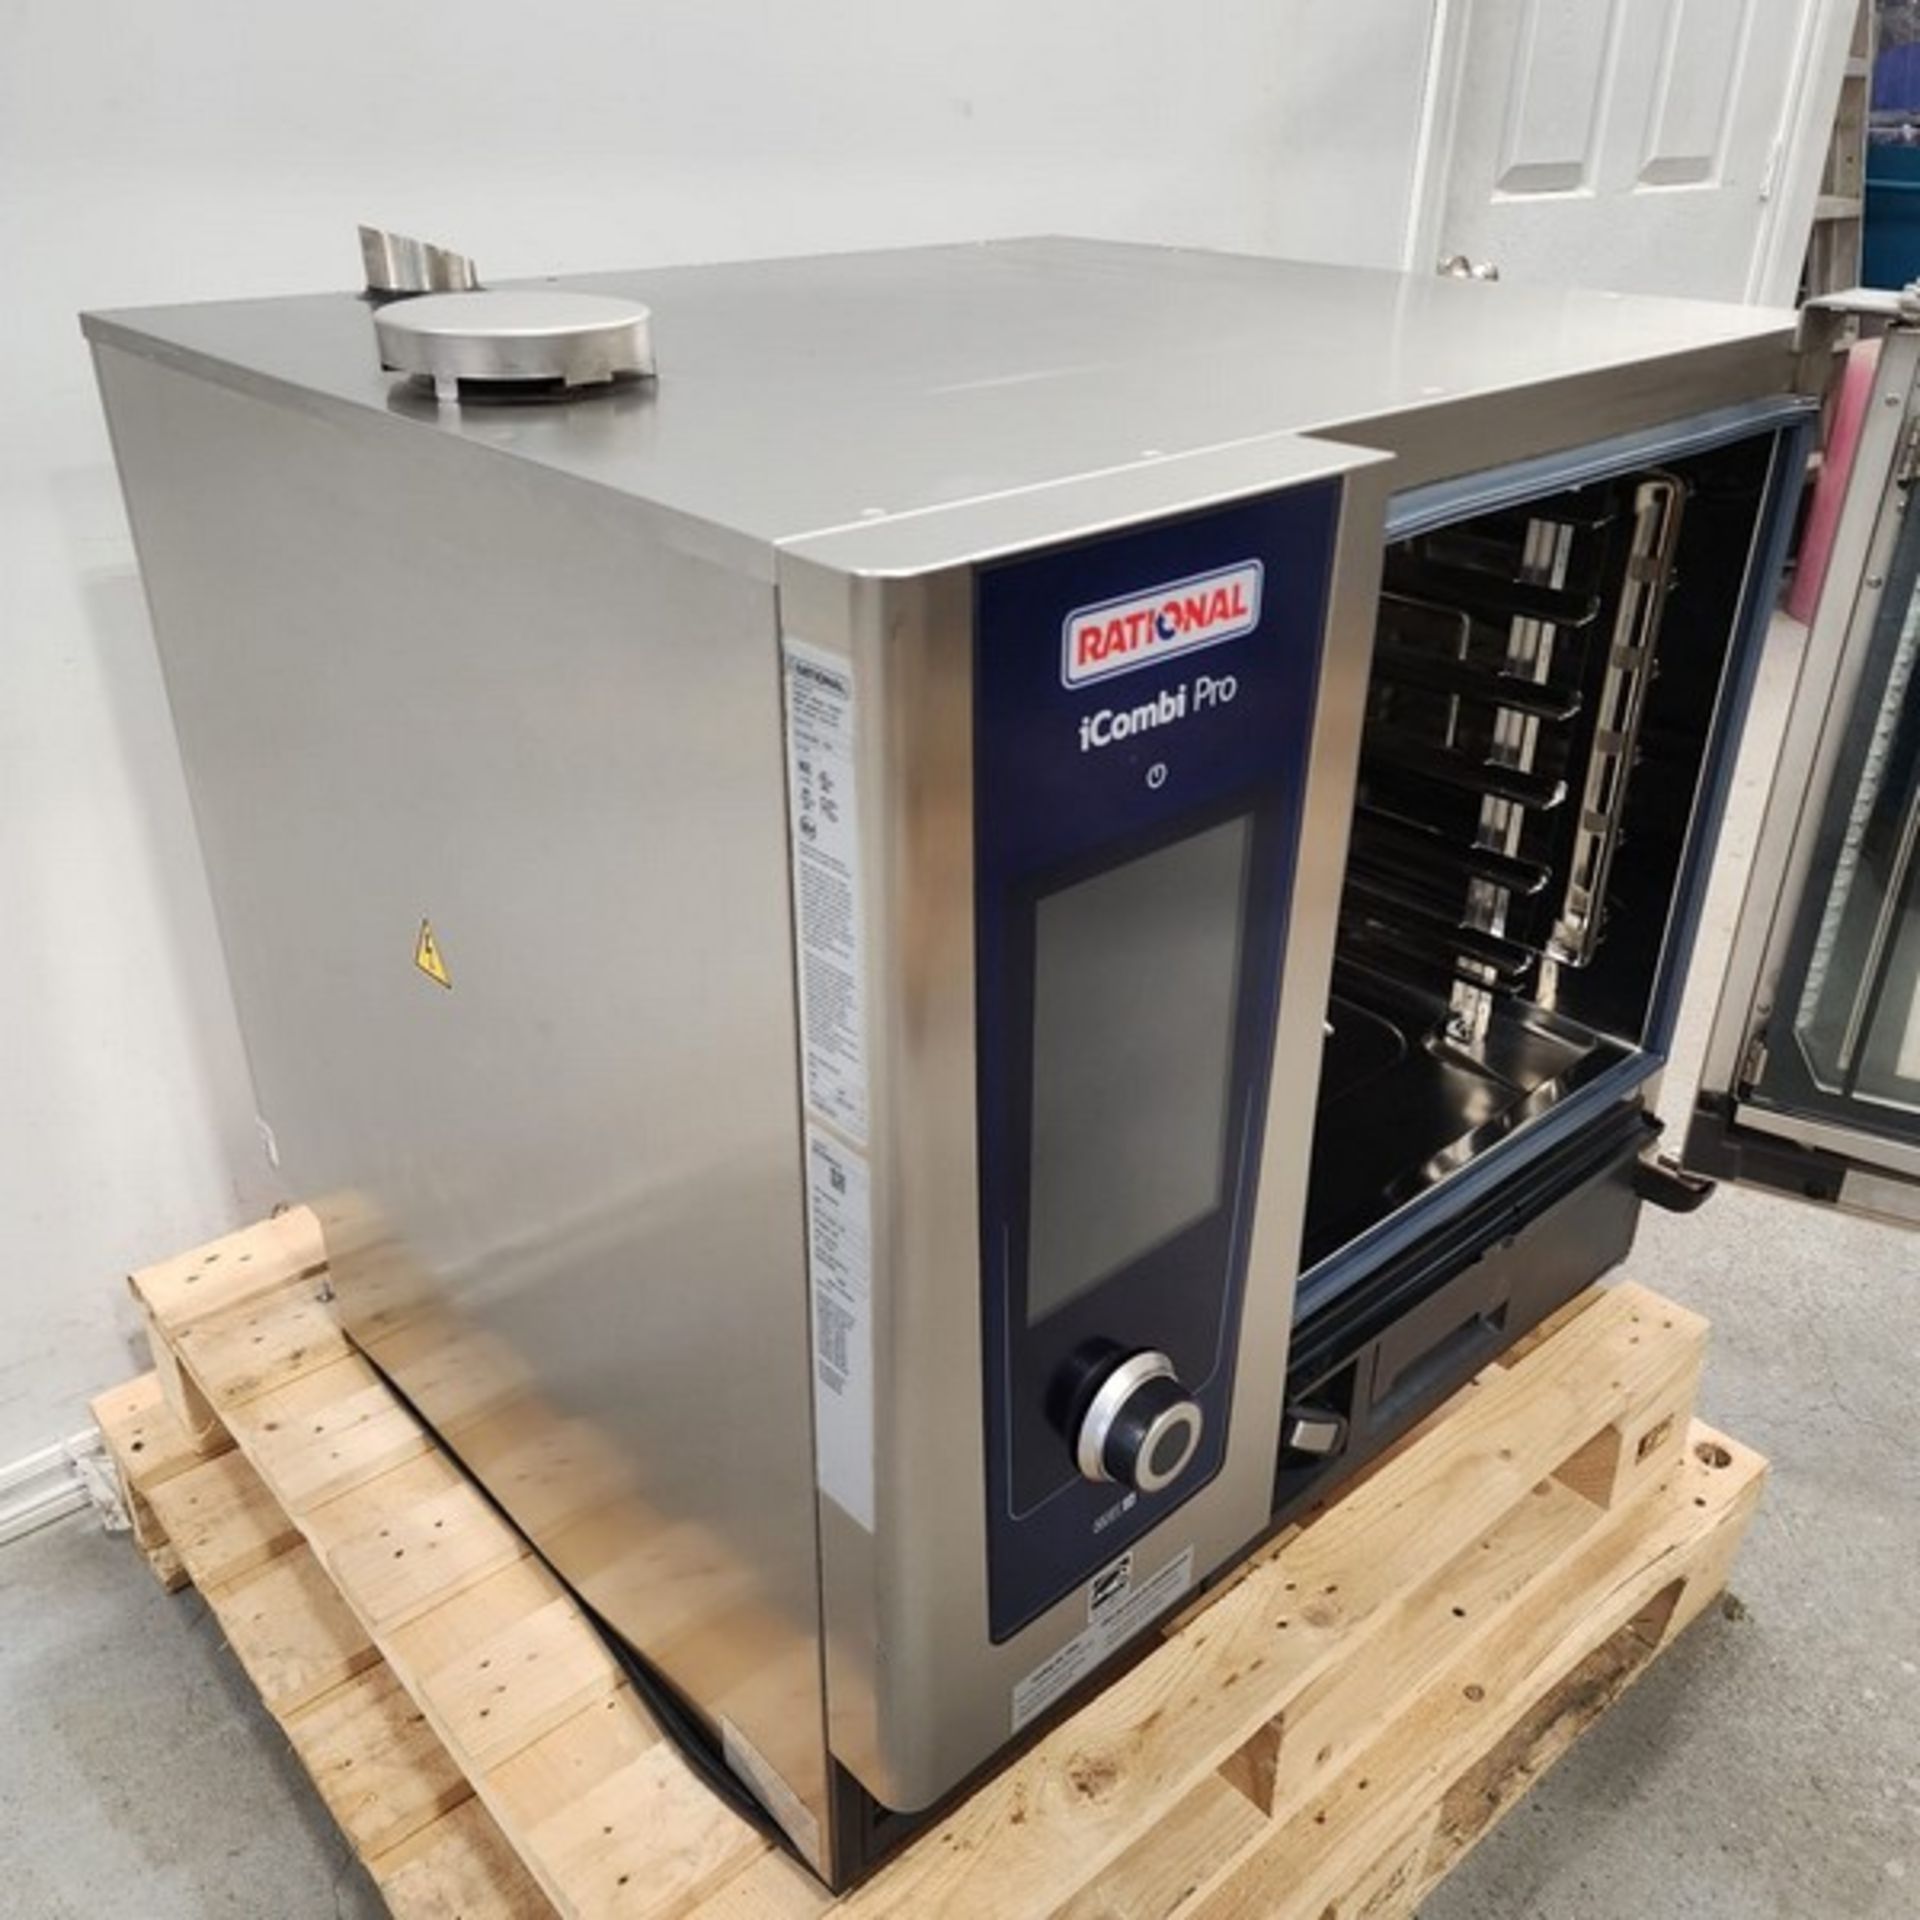 Rational Oven 480 v 3 phase brand new icombi pro new condition (Item #103R) (simple loading Fee $ - Bild 2 aus 7